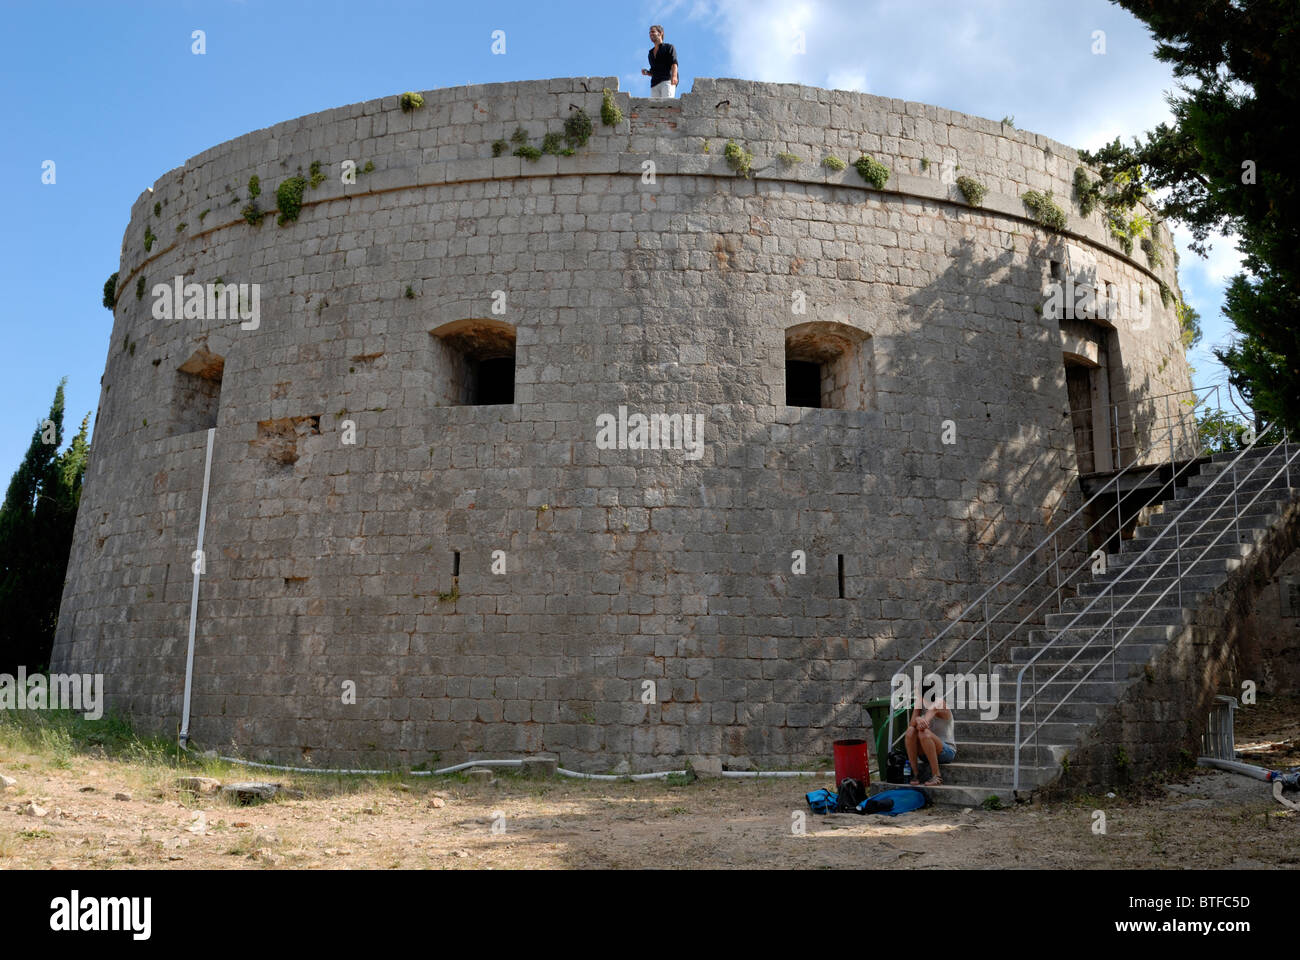 A fine view to the Fort Royal of the Lokrum Island. The French army started the construction of the fortress immediately after.. Stock Photo